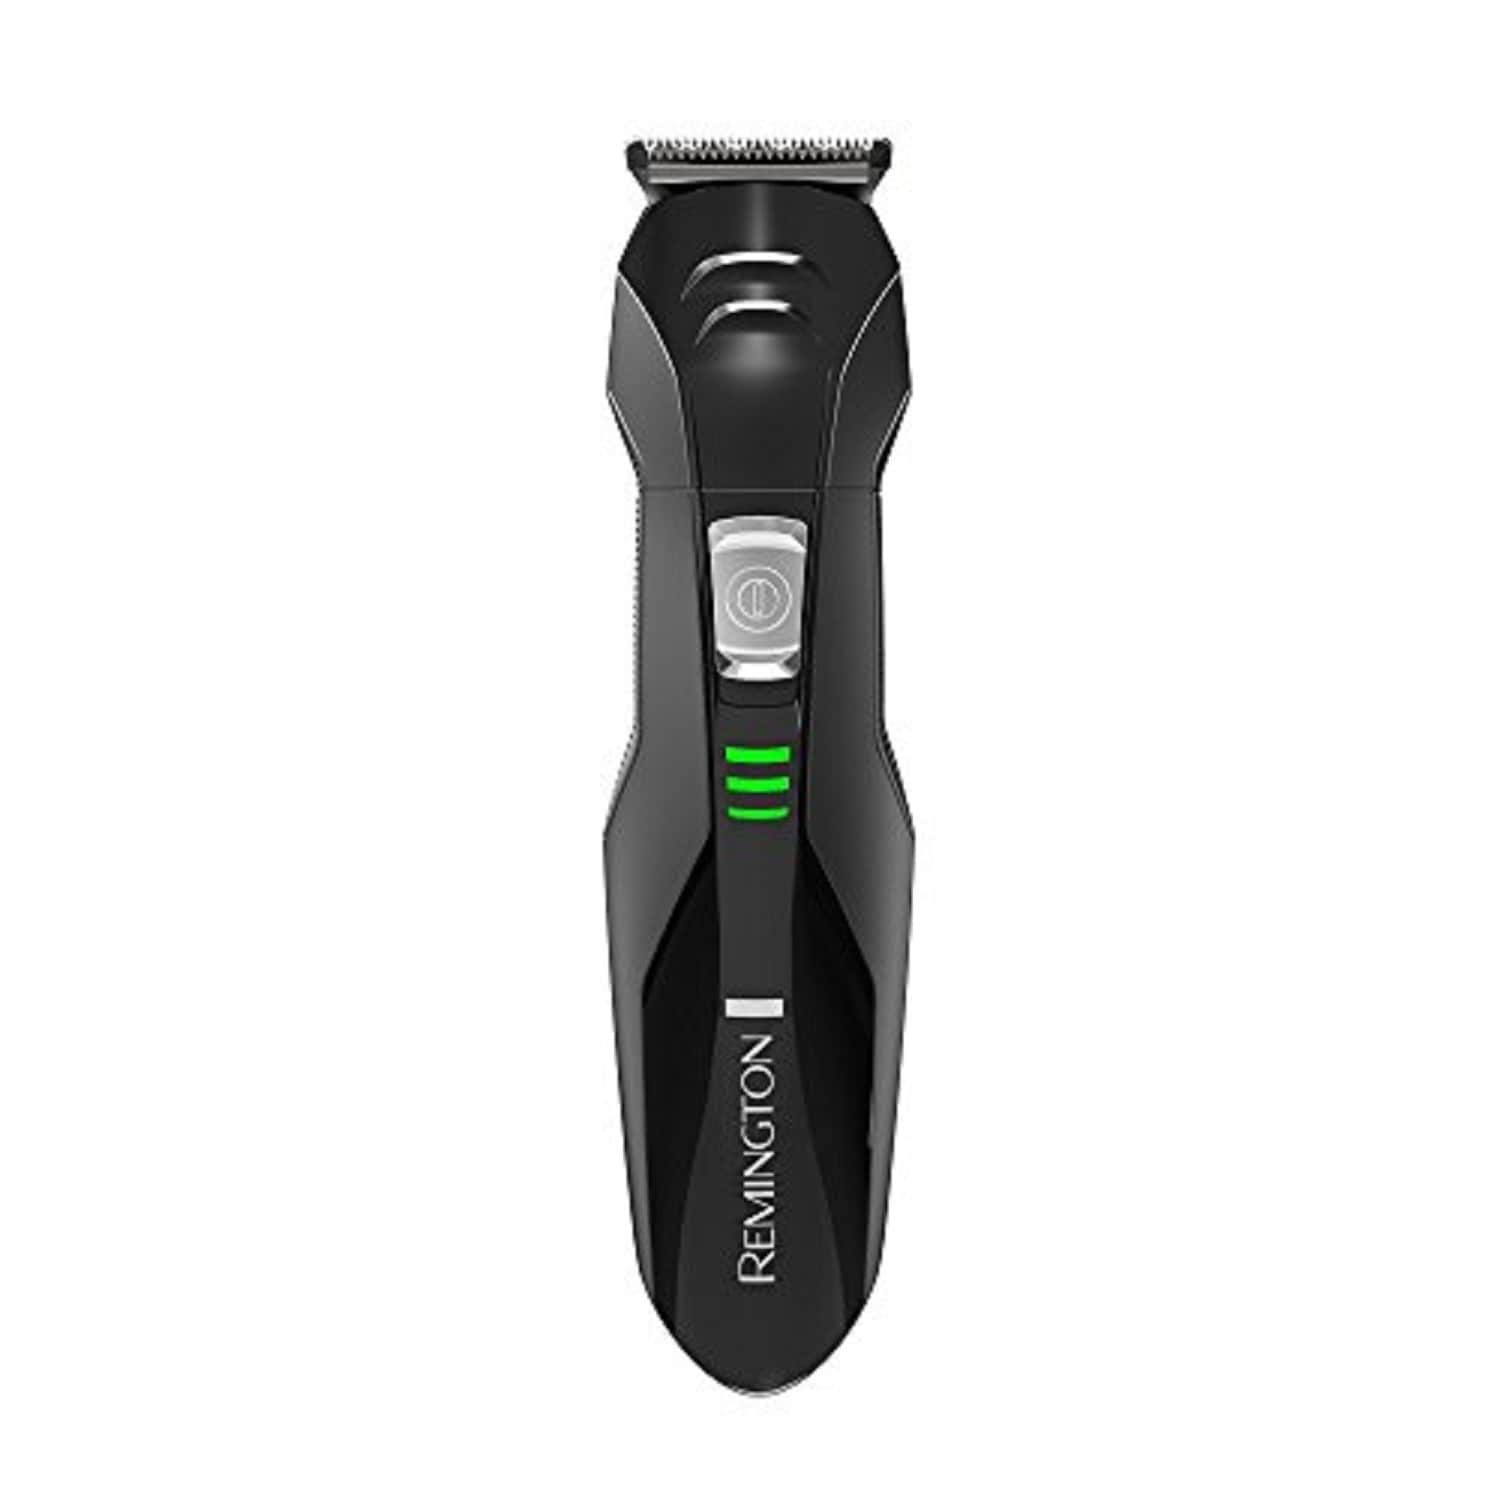 remington all in one trimmer